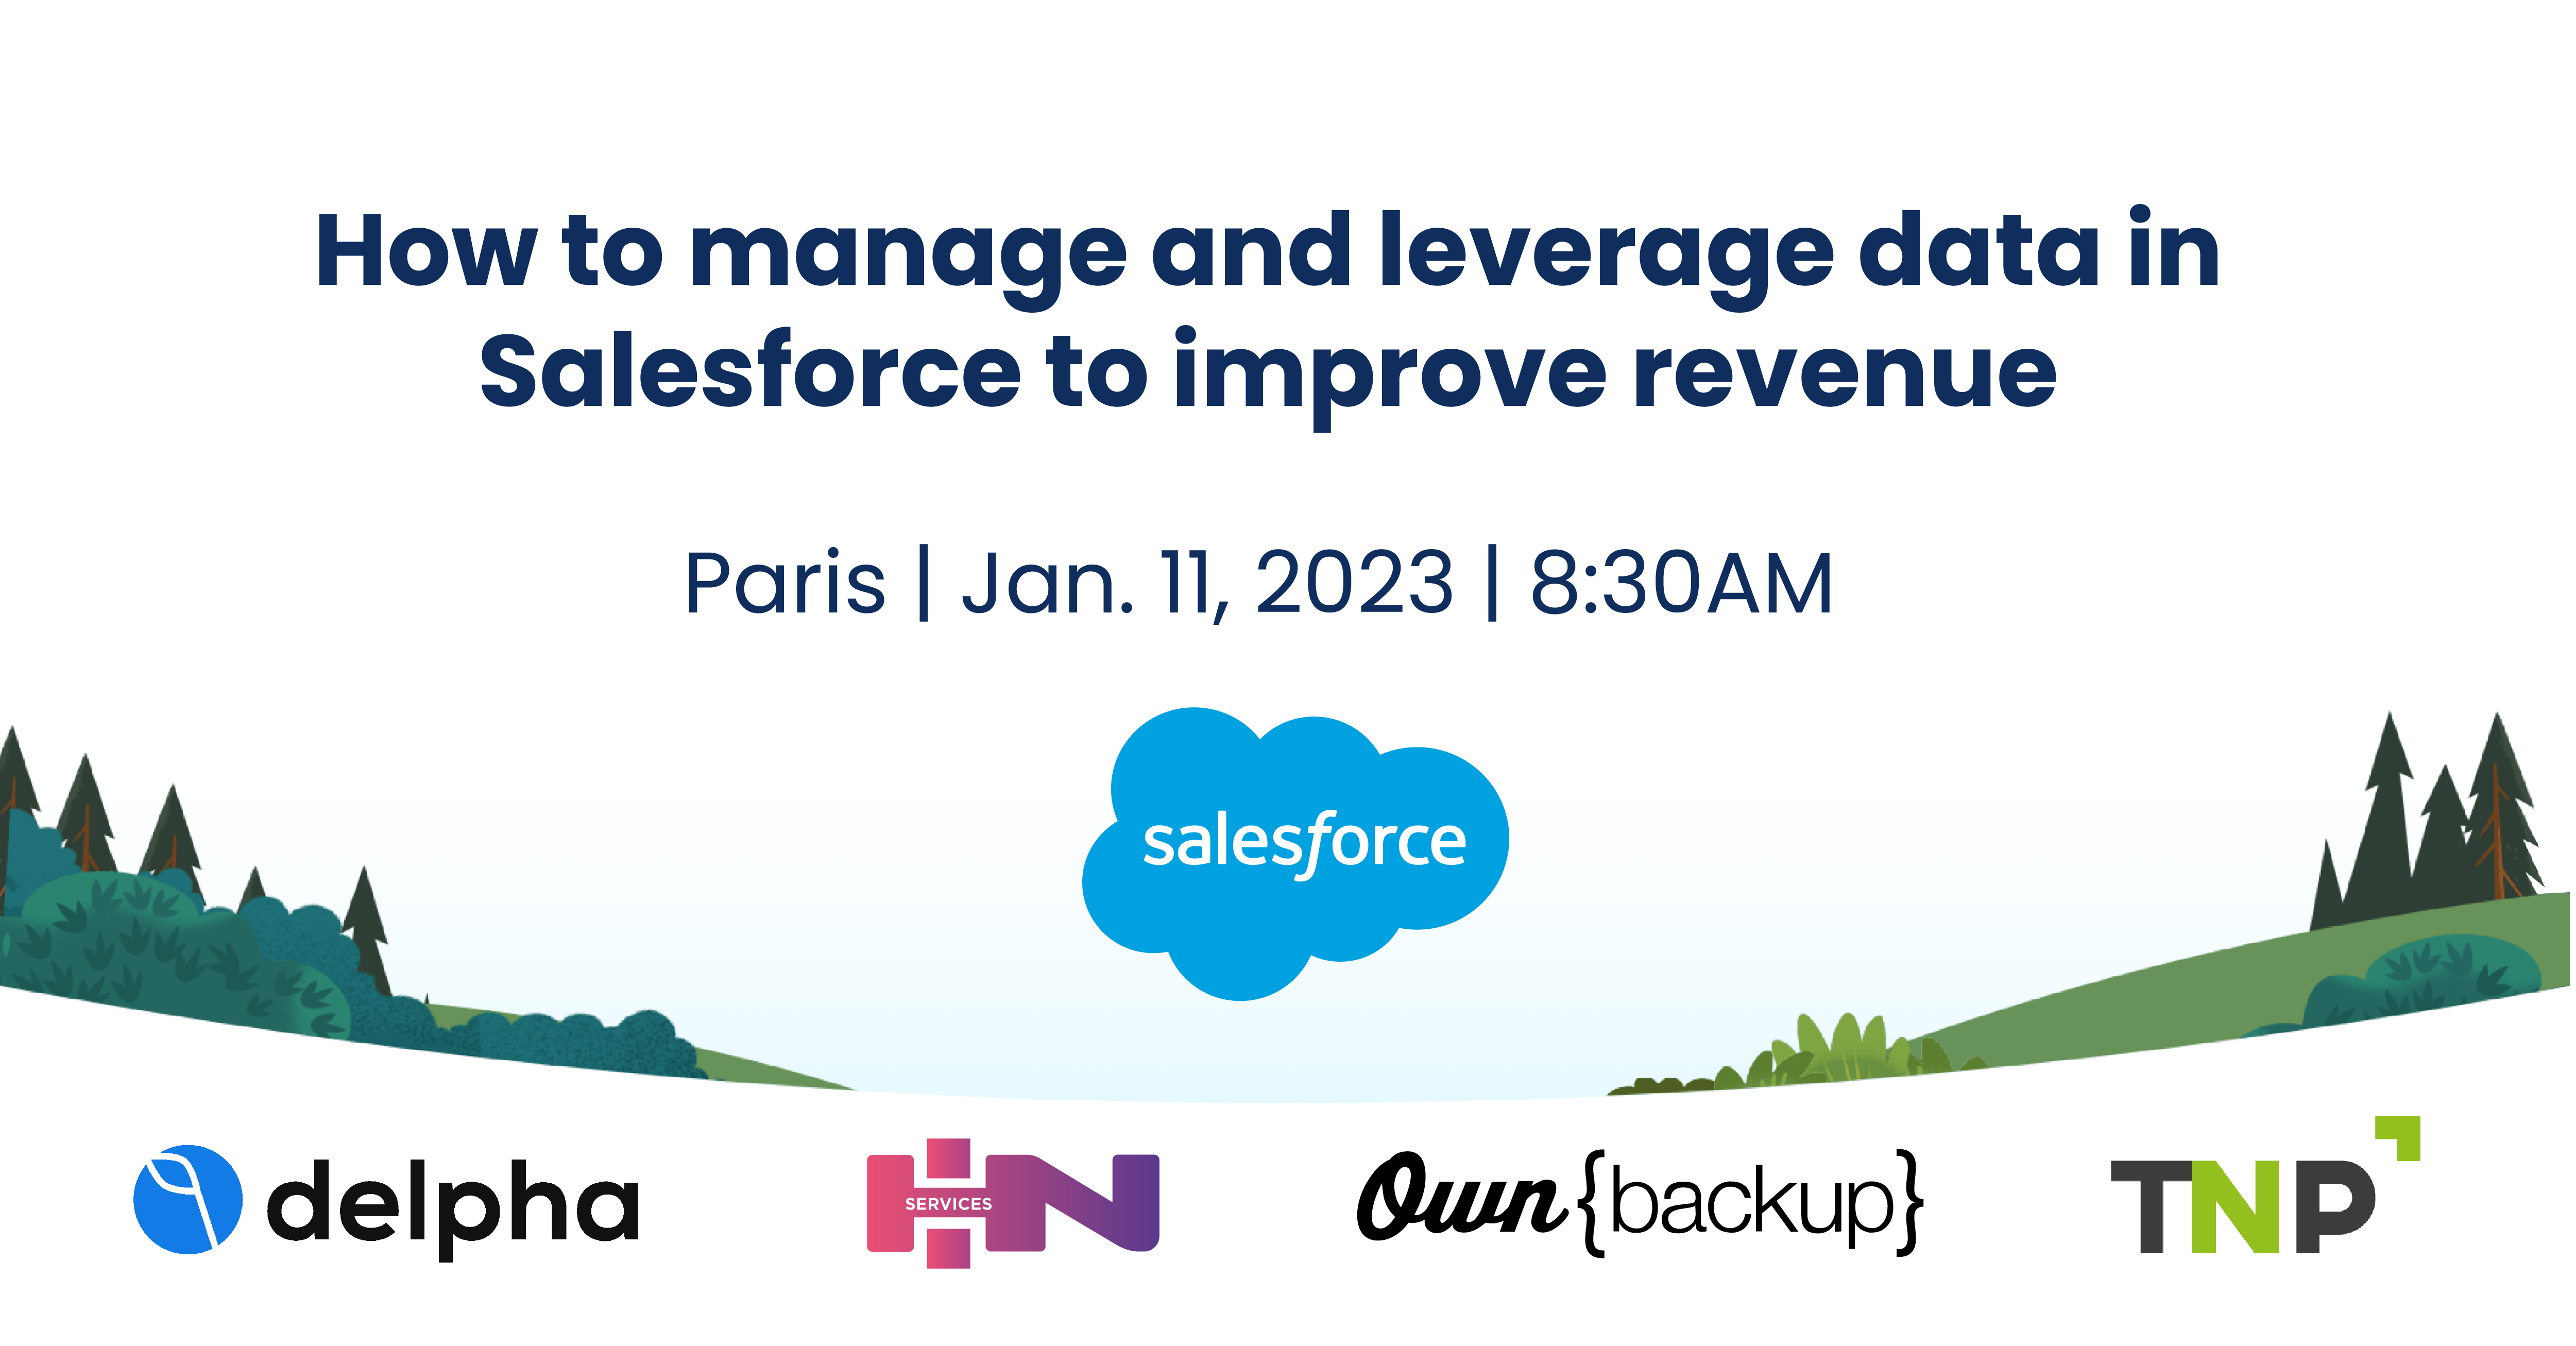 Salesforce event promotion graphic with partner logos including delpha, HN Services, OwnBackup and TNP